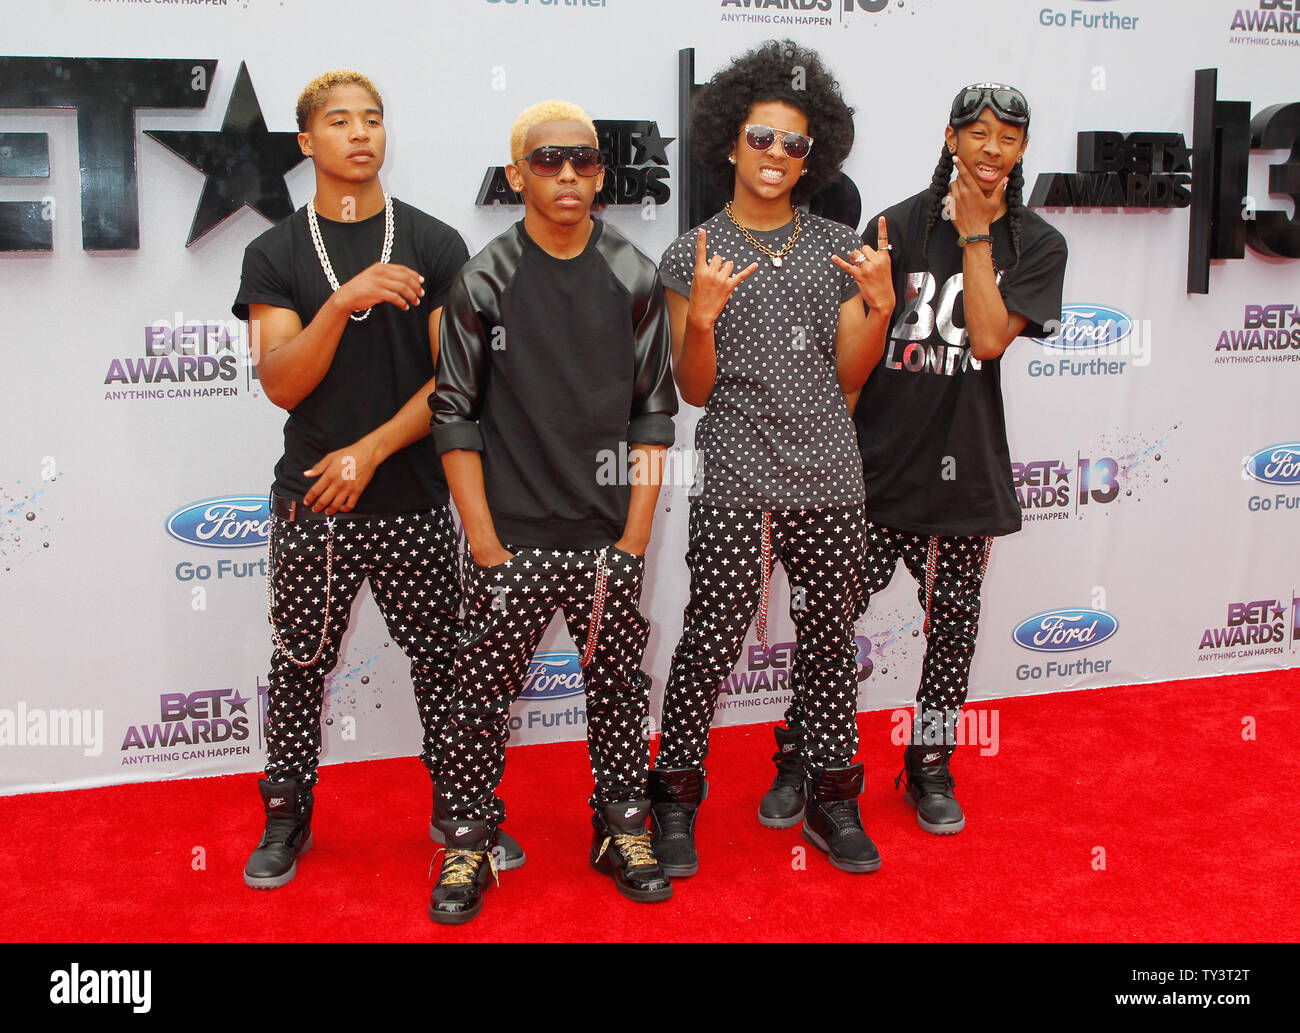 Singers Roc Royal, Princeton, Prodigy and Ray Ray of Mindless Behavior (L-R) attend the BET Awards 13, at the Nokia Theatre in Los Angeles on June 30, 2013.   UPI/Alex Gallardo Stock Photo